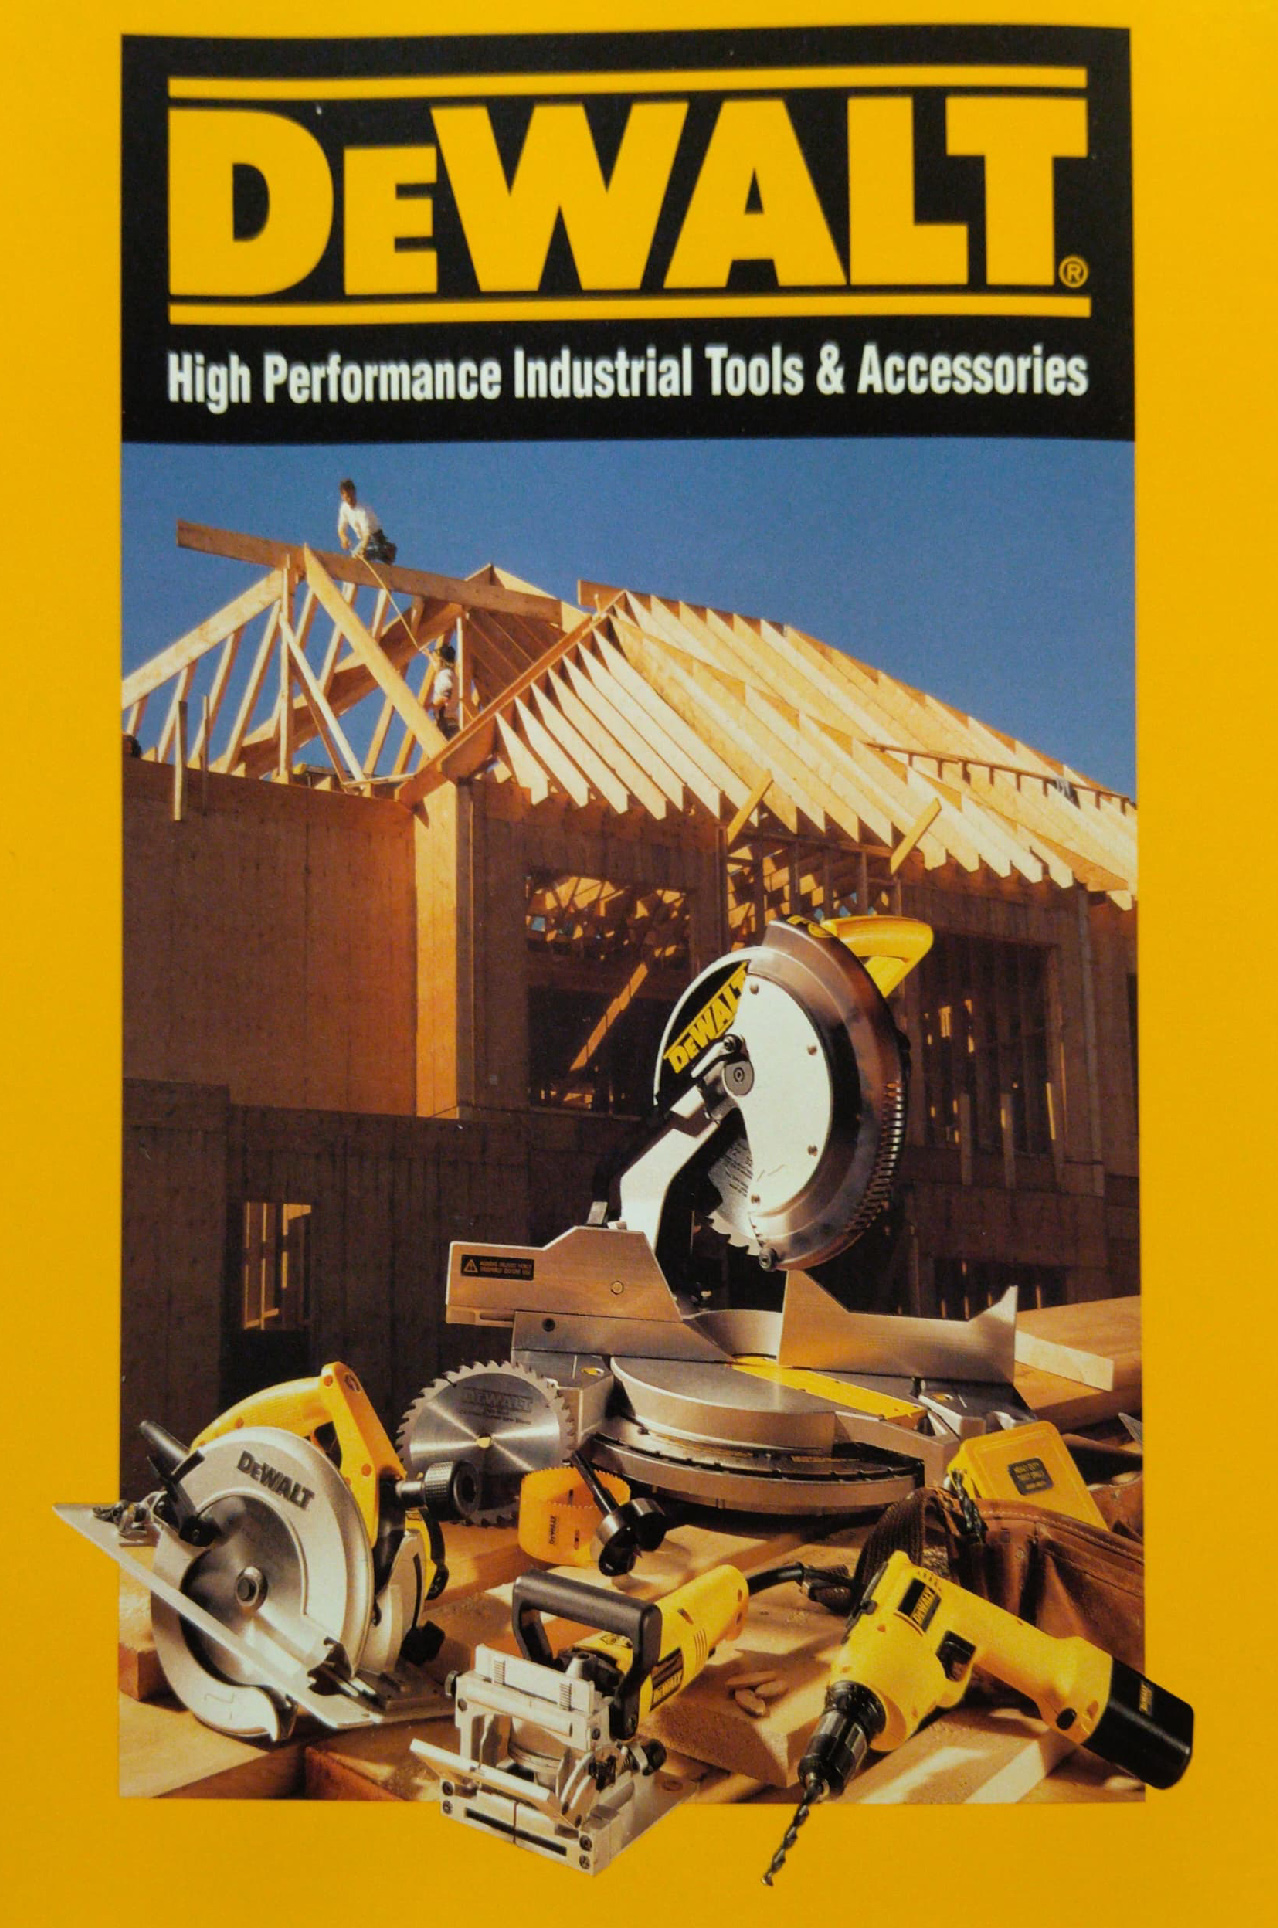 In 1992, DEWALT introduced its first line of portable electric power tools and accessories designed specifically for residential contractors, remodelers and professional woodworkers.